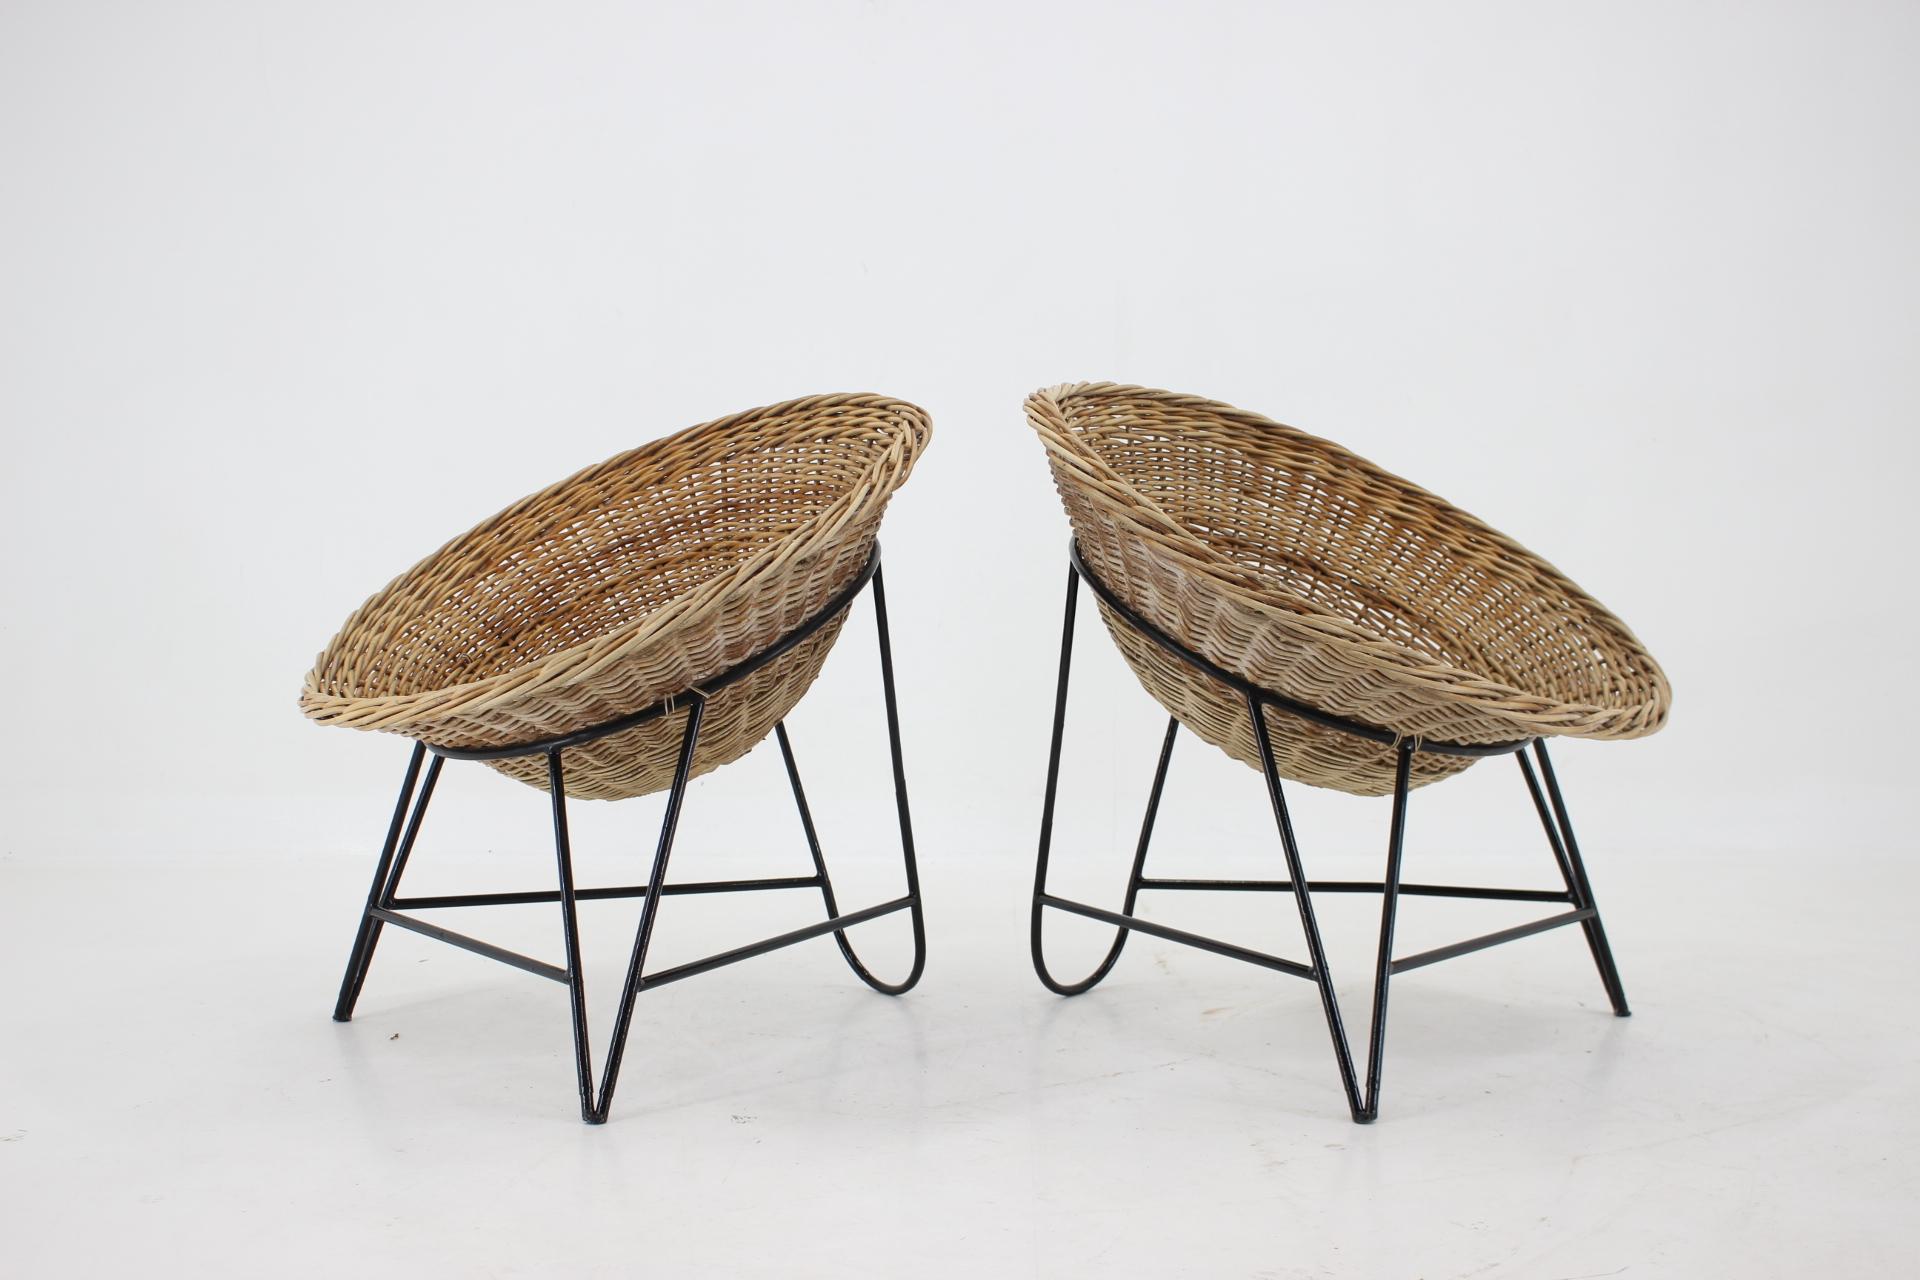 German 1960s Pair of Rattan Woven Basket Chair with Hairpin Legs For Sale